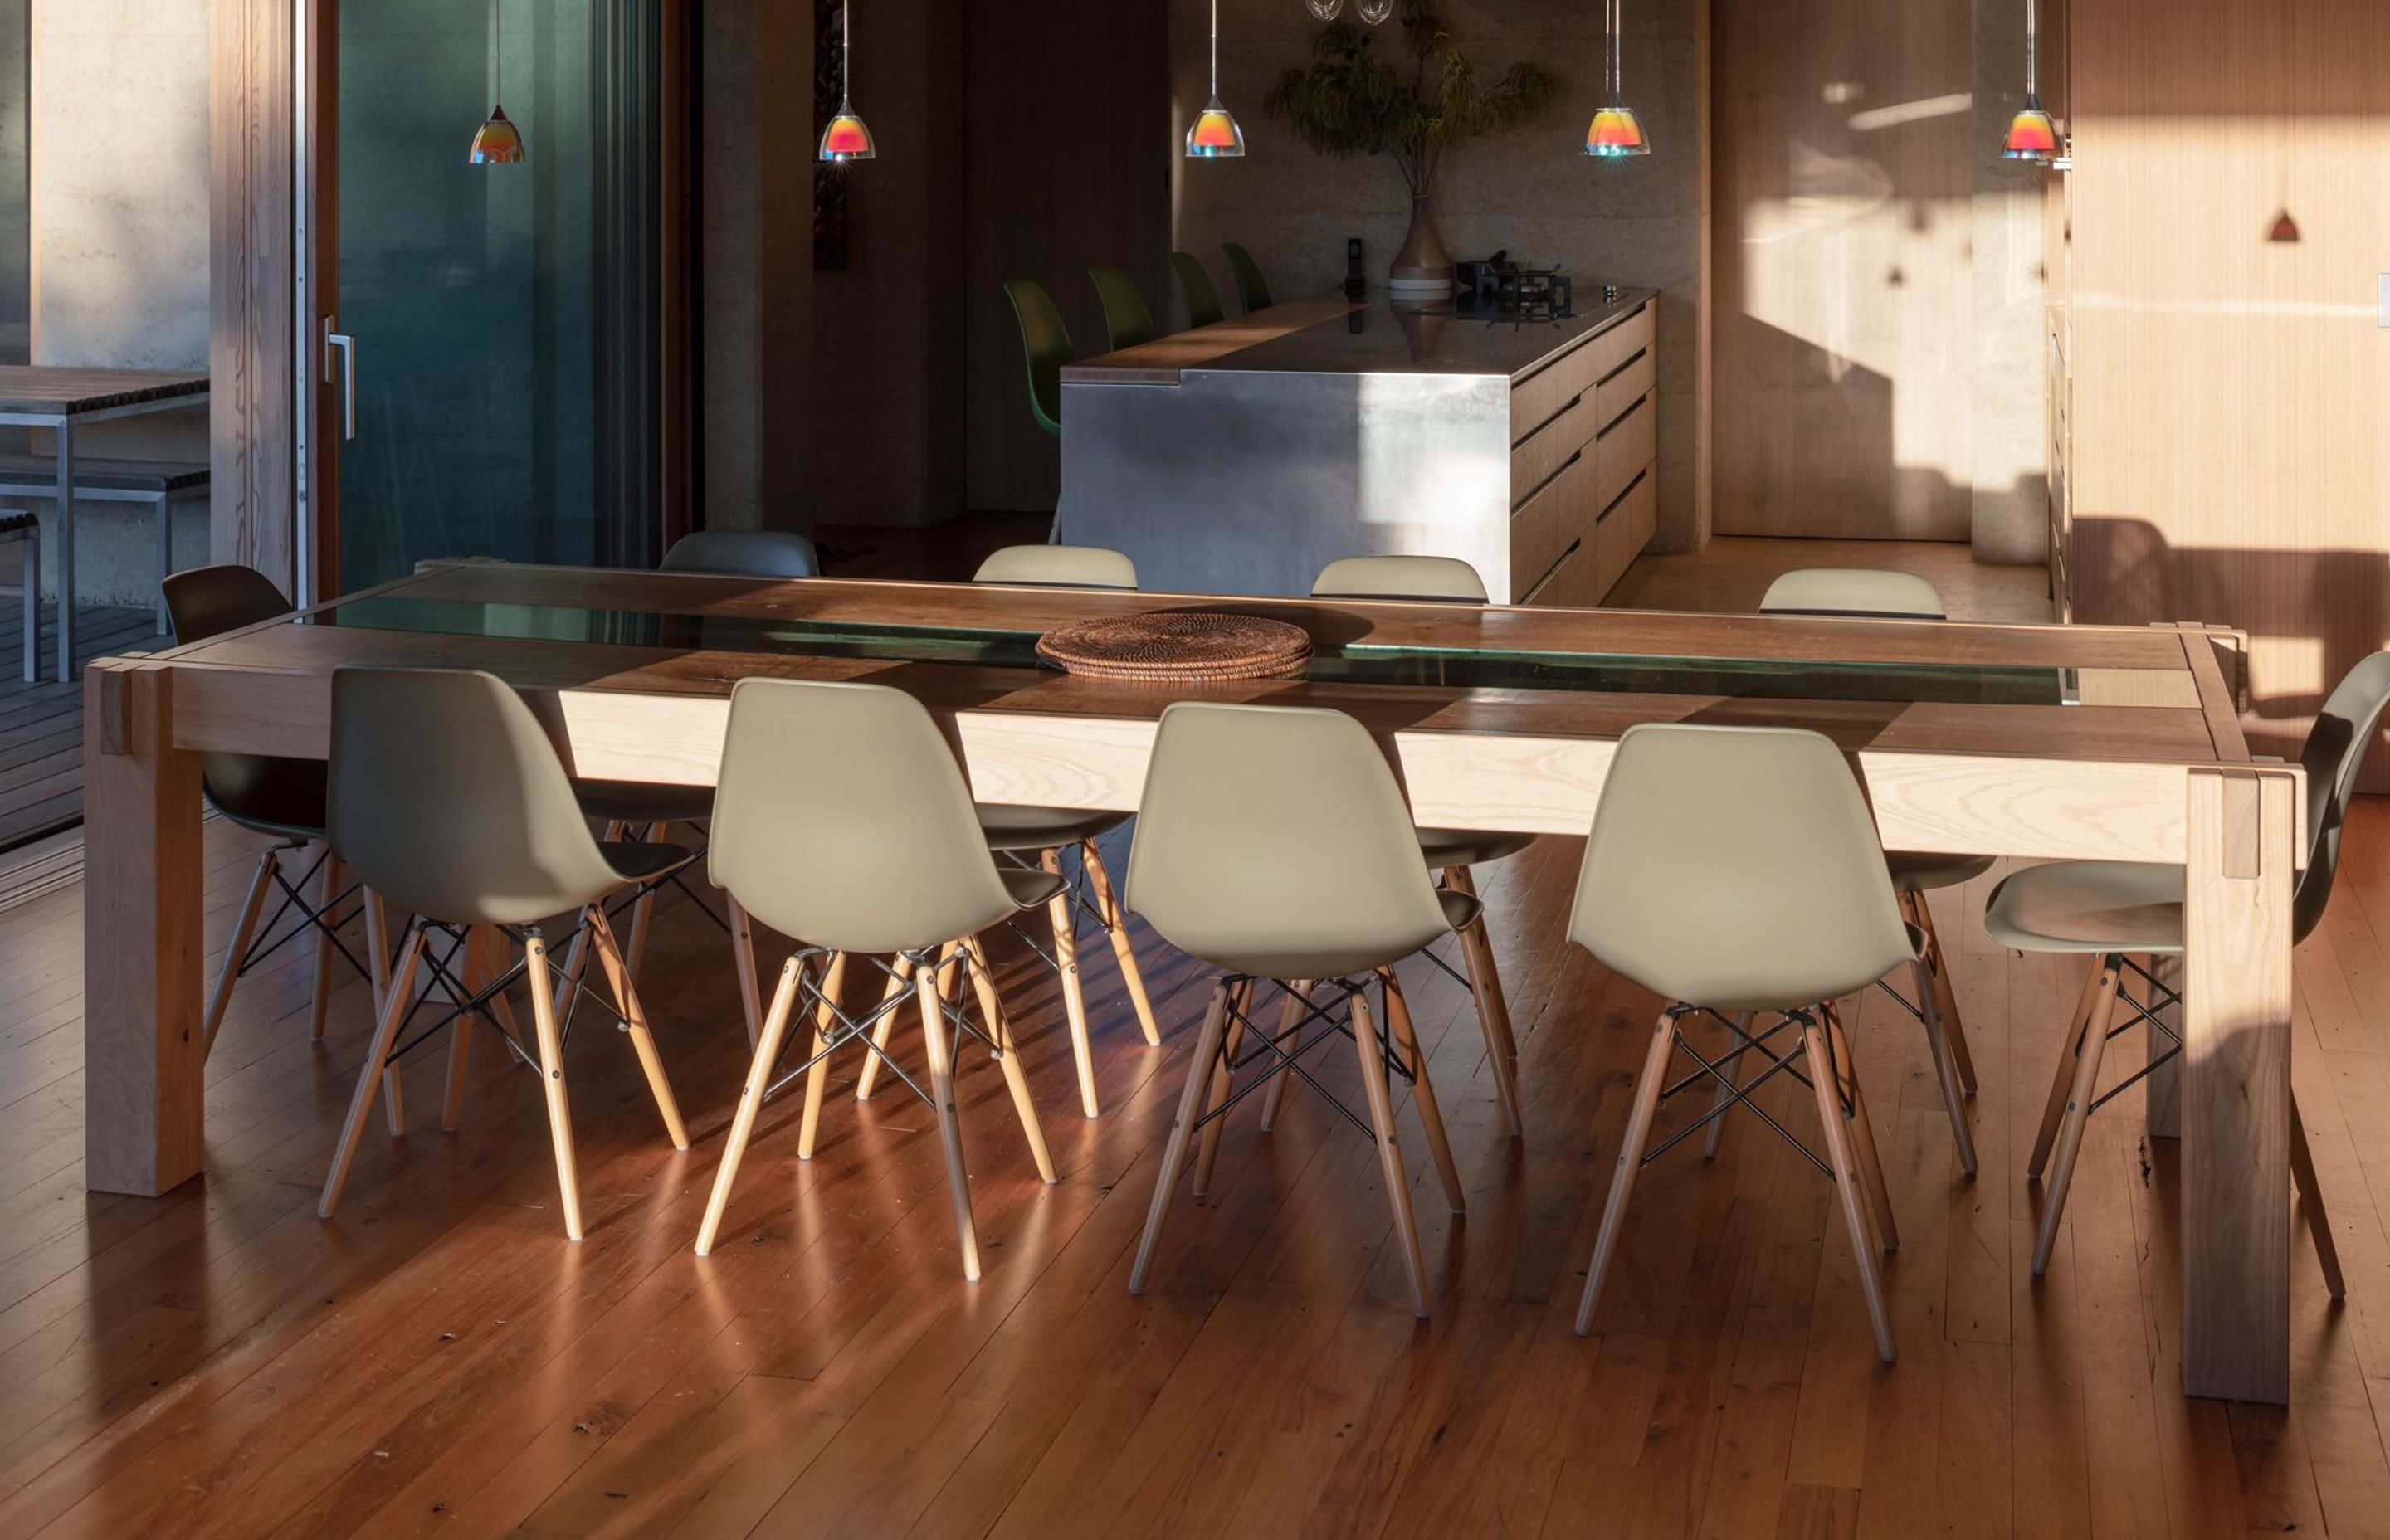 In keeping with the theme of sustainability, much of the furniture and fixtures were handmade by the homeowner, including the large dining table.